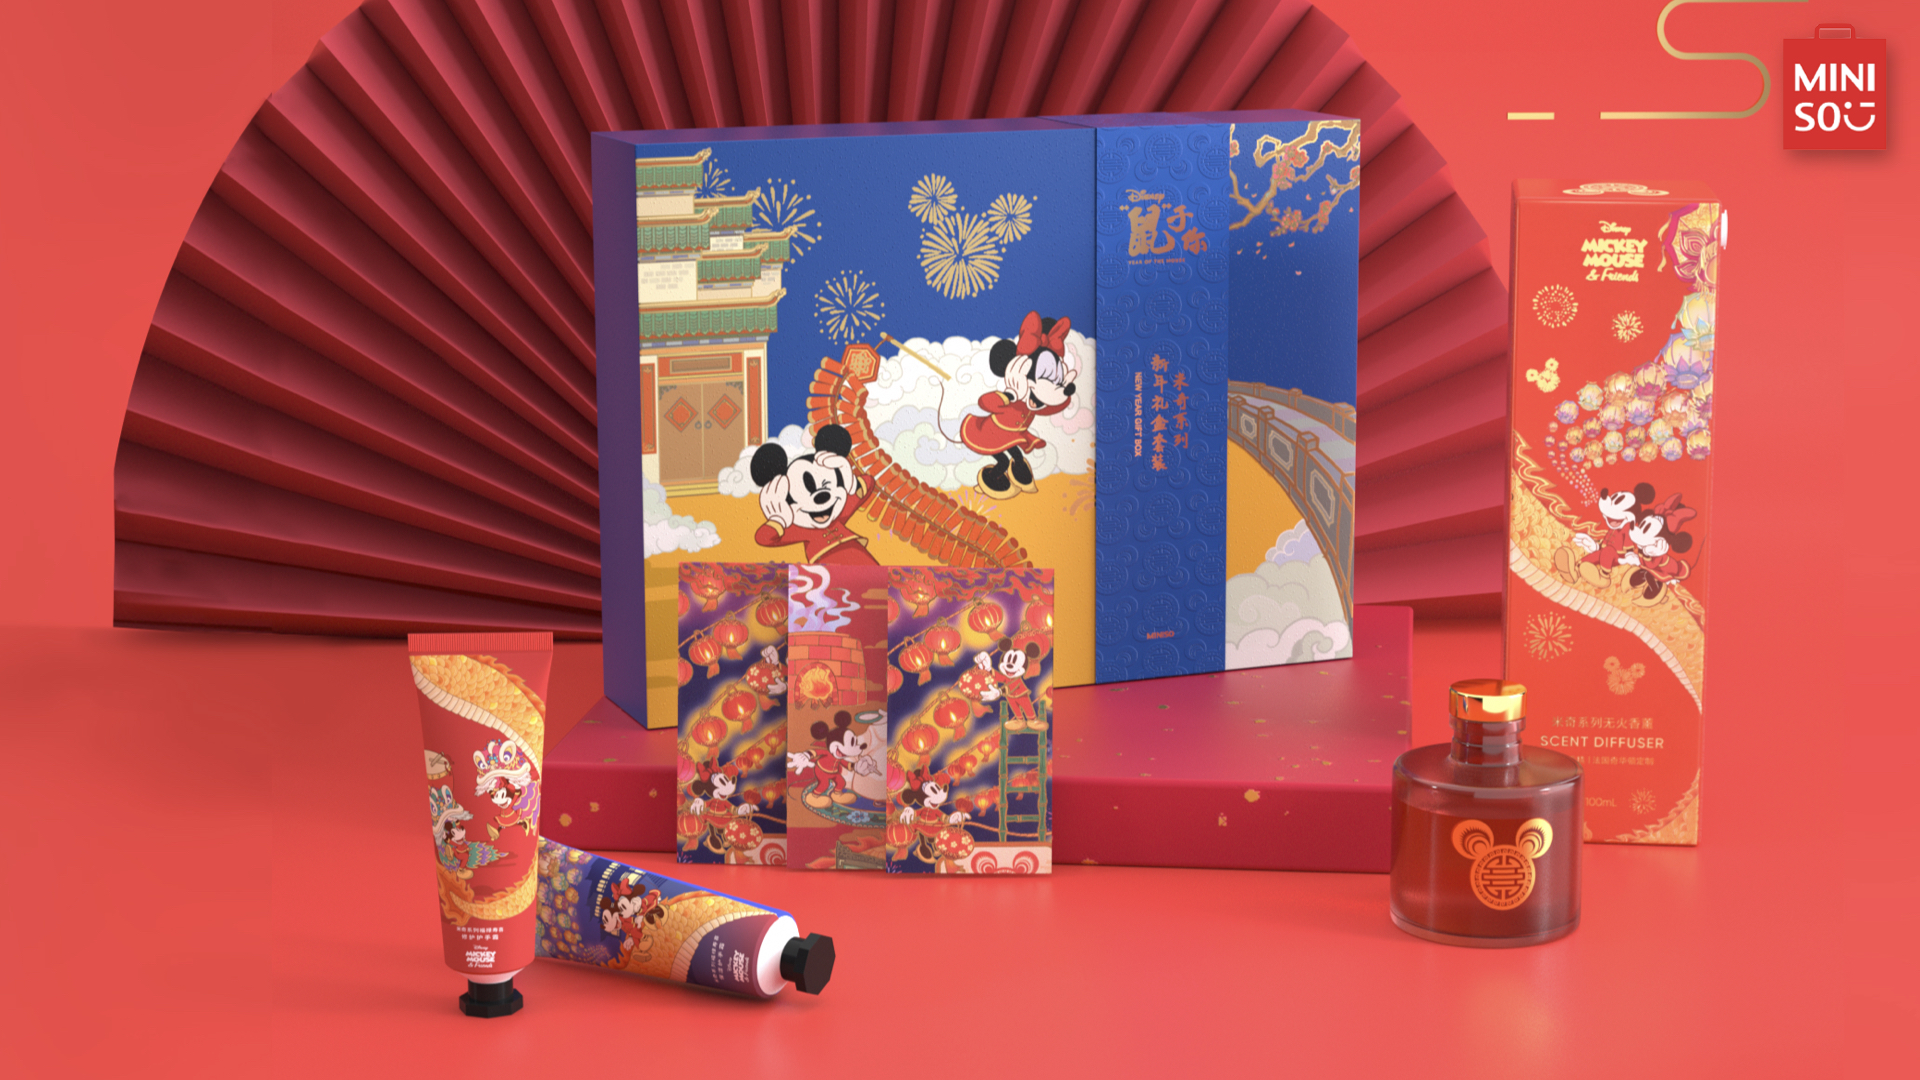 Marketing Watch | Taking advantage of Mickey Mouse's birthday, Disney plans to sell new tricks around it